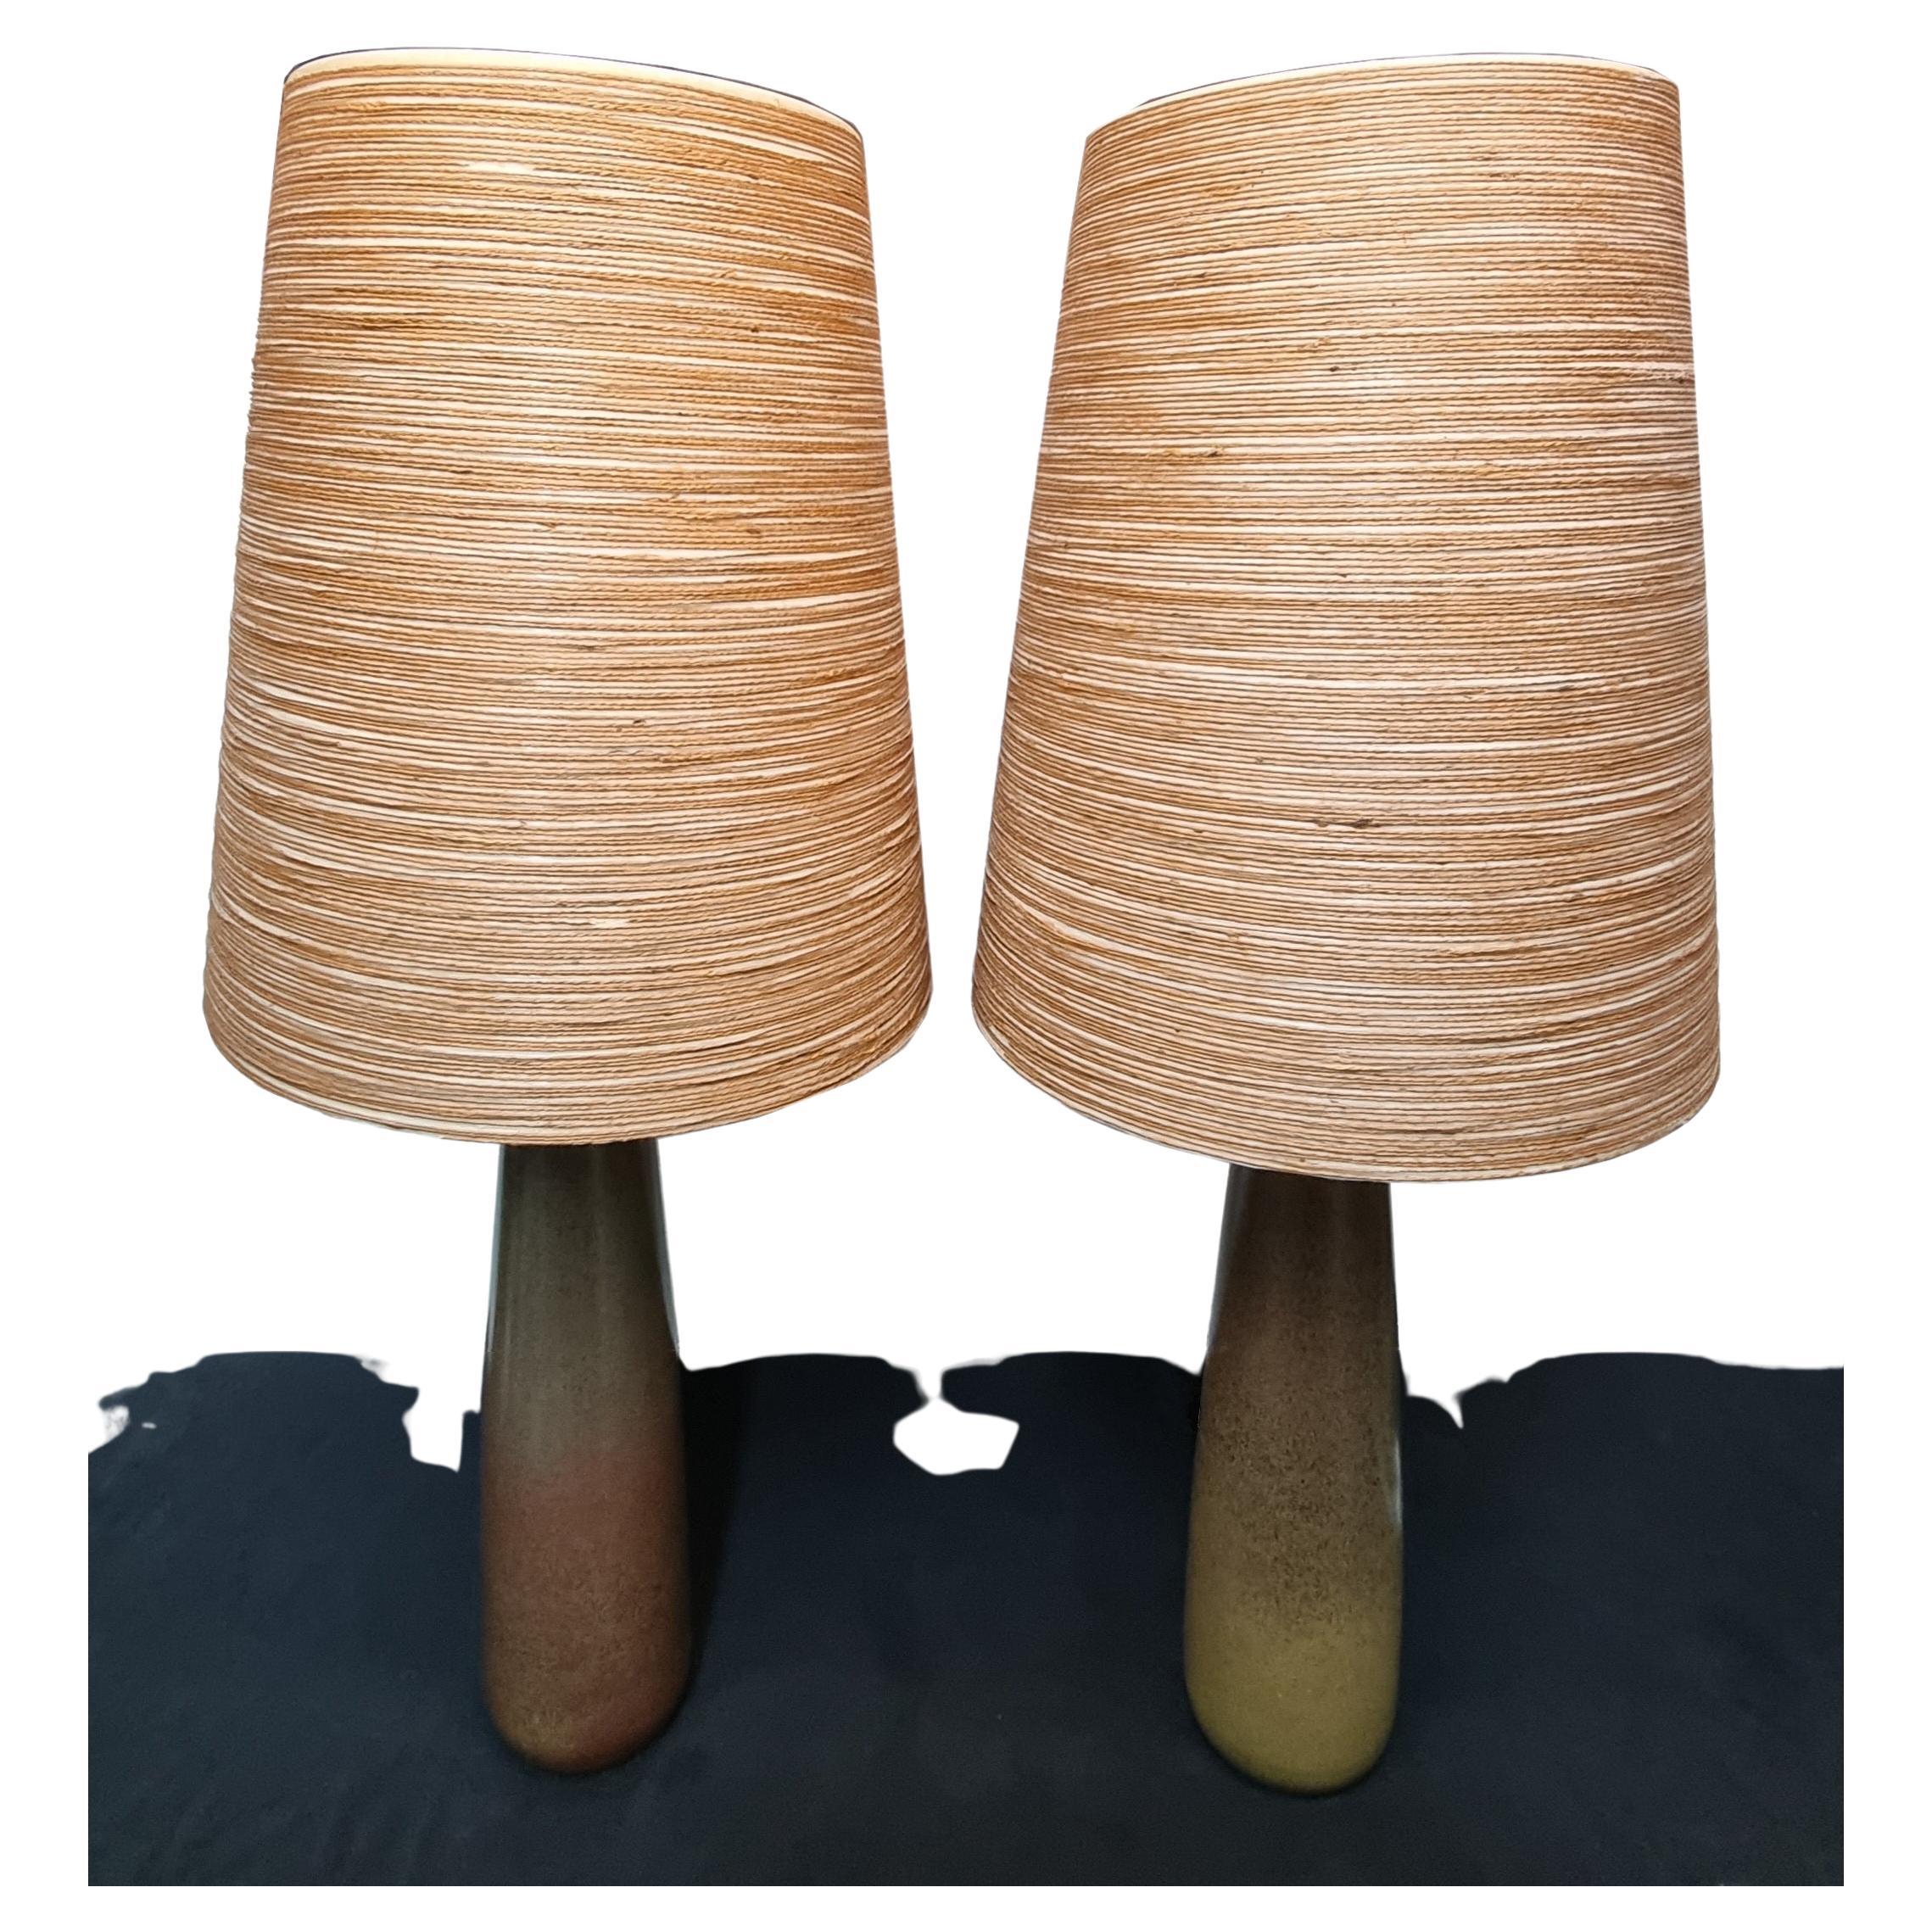 Impressive Large Pair of 1960s Ceramic Lamps by Lotte and Gunnar Bostlund.

Mid Century.

Mottled olive green colored bodies with a brown earth tones,
original fiberglass & jute shades & finials.

Lamps stand approximately 35 1/2